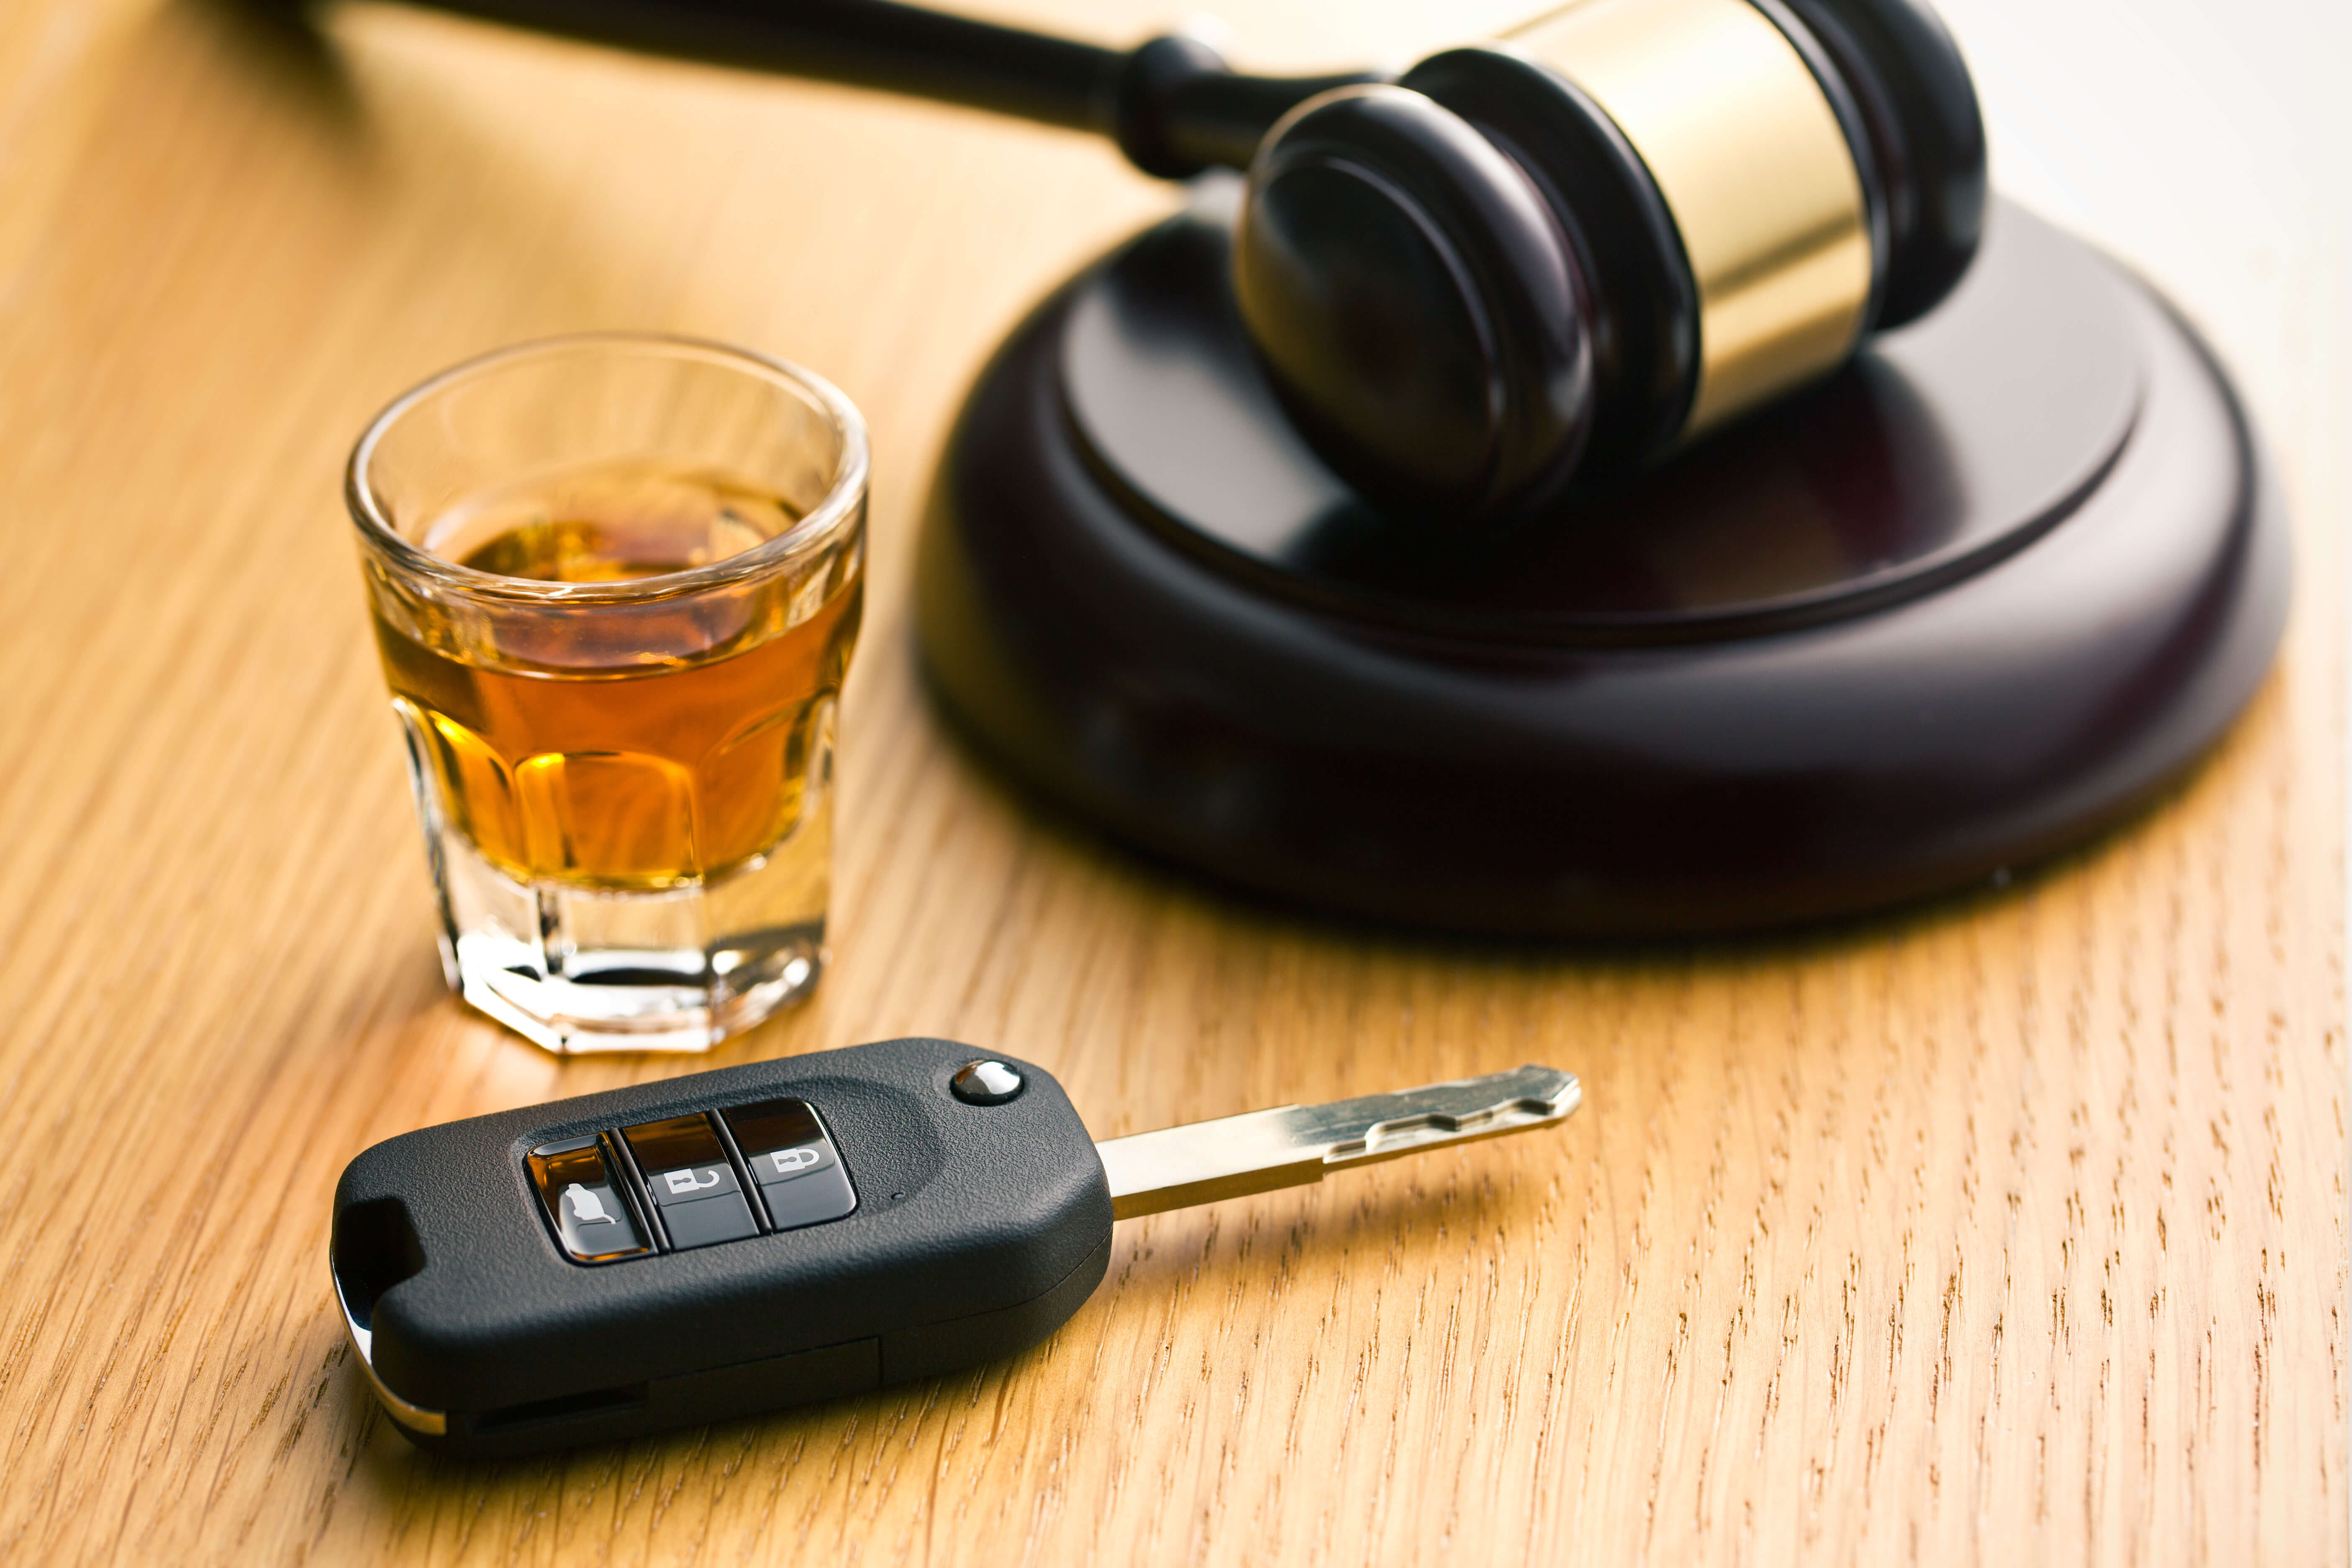 Car keys, whiskey and gavel - what is an ALR hearing